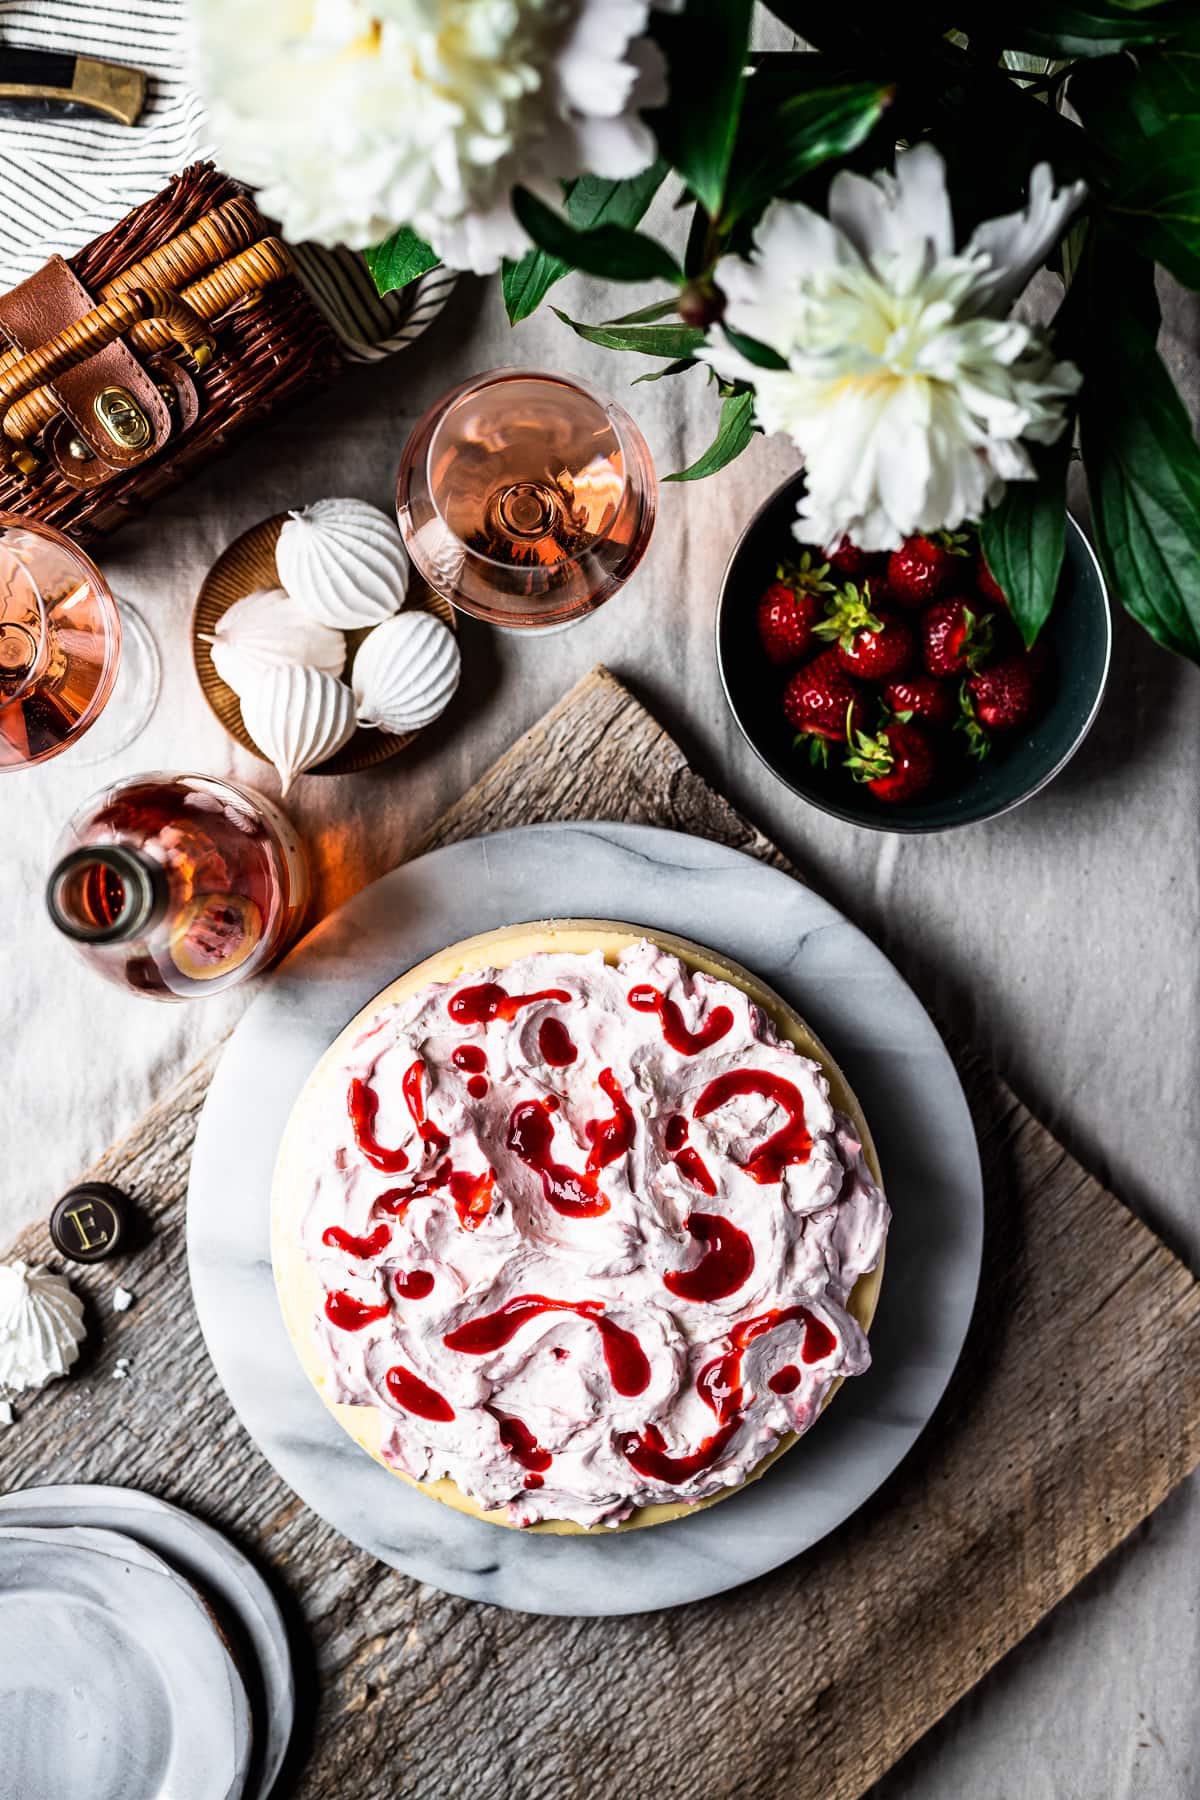 Top view of cheesecake being assembled with whipped cream topping and strawberry coulis. The cheesecake rests on a marble platter on a rustic wooden board. It looks like a picnic scene with a blanket, basket, pocketknife and flowers nearby.